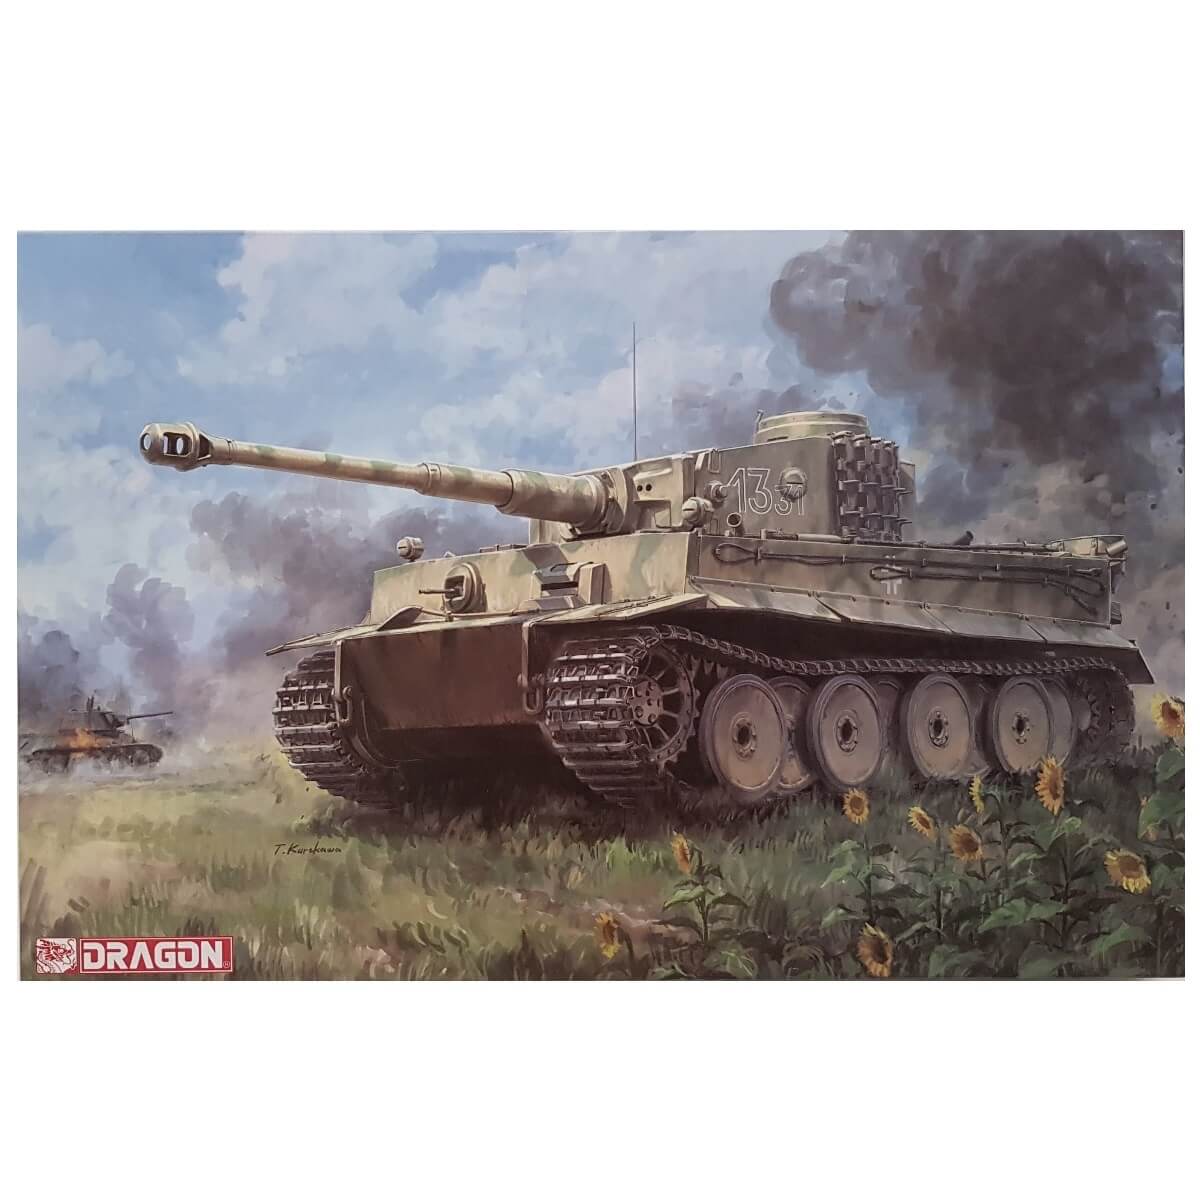 1:35 Tiger I Early Production - Wittmann's Tiger 13./Panzer Regiment 1 - July 1943 Operation "Zitadelle" - DRAGON